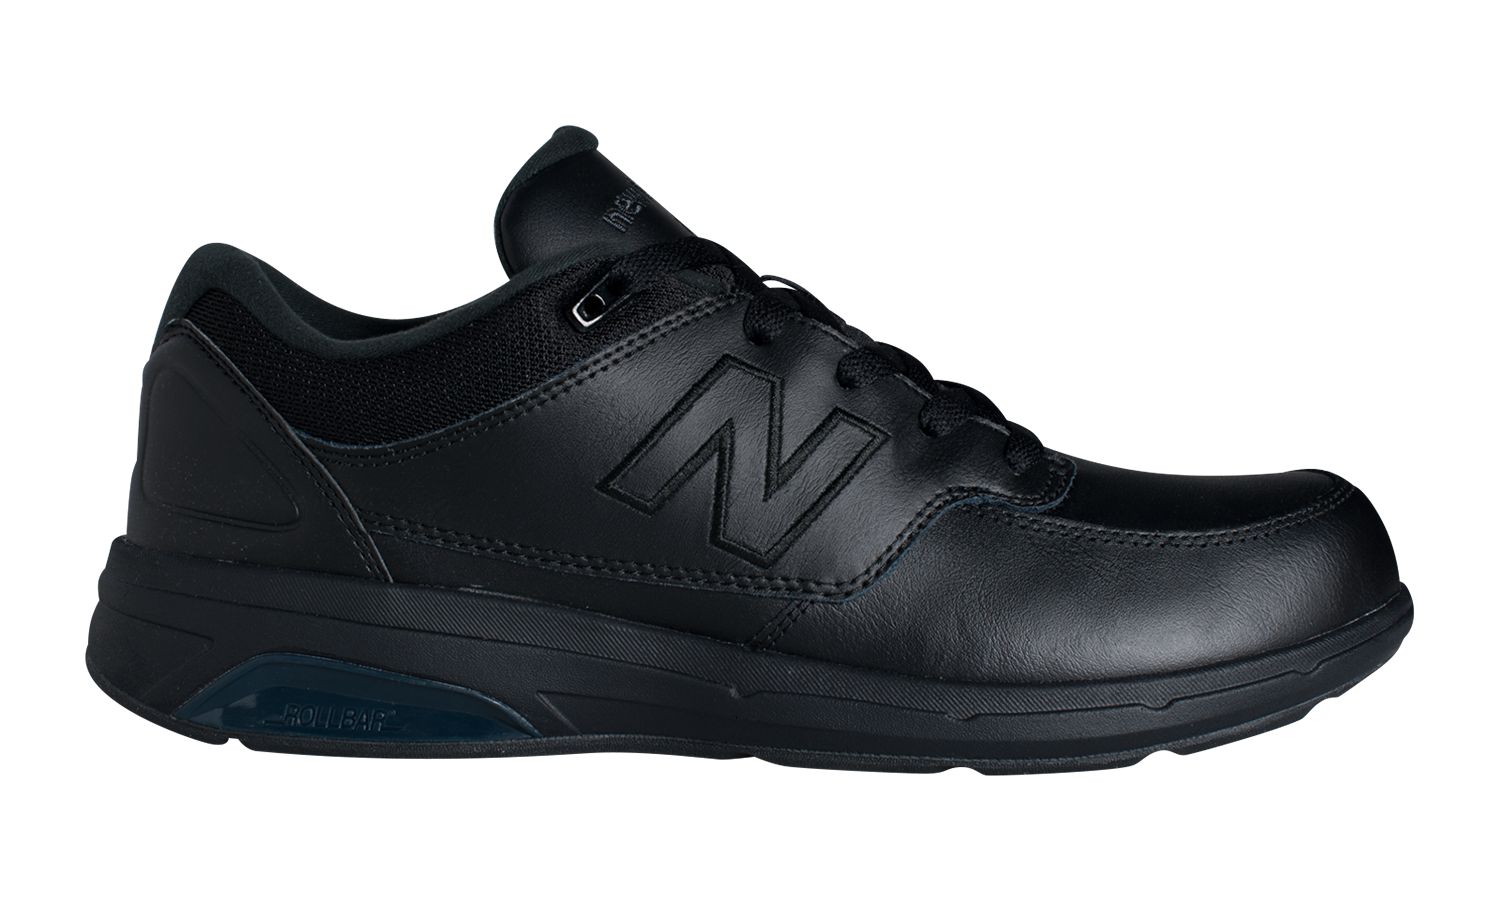 hitchcock wide shoes new balance